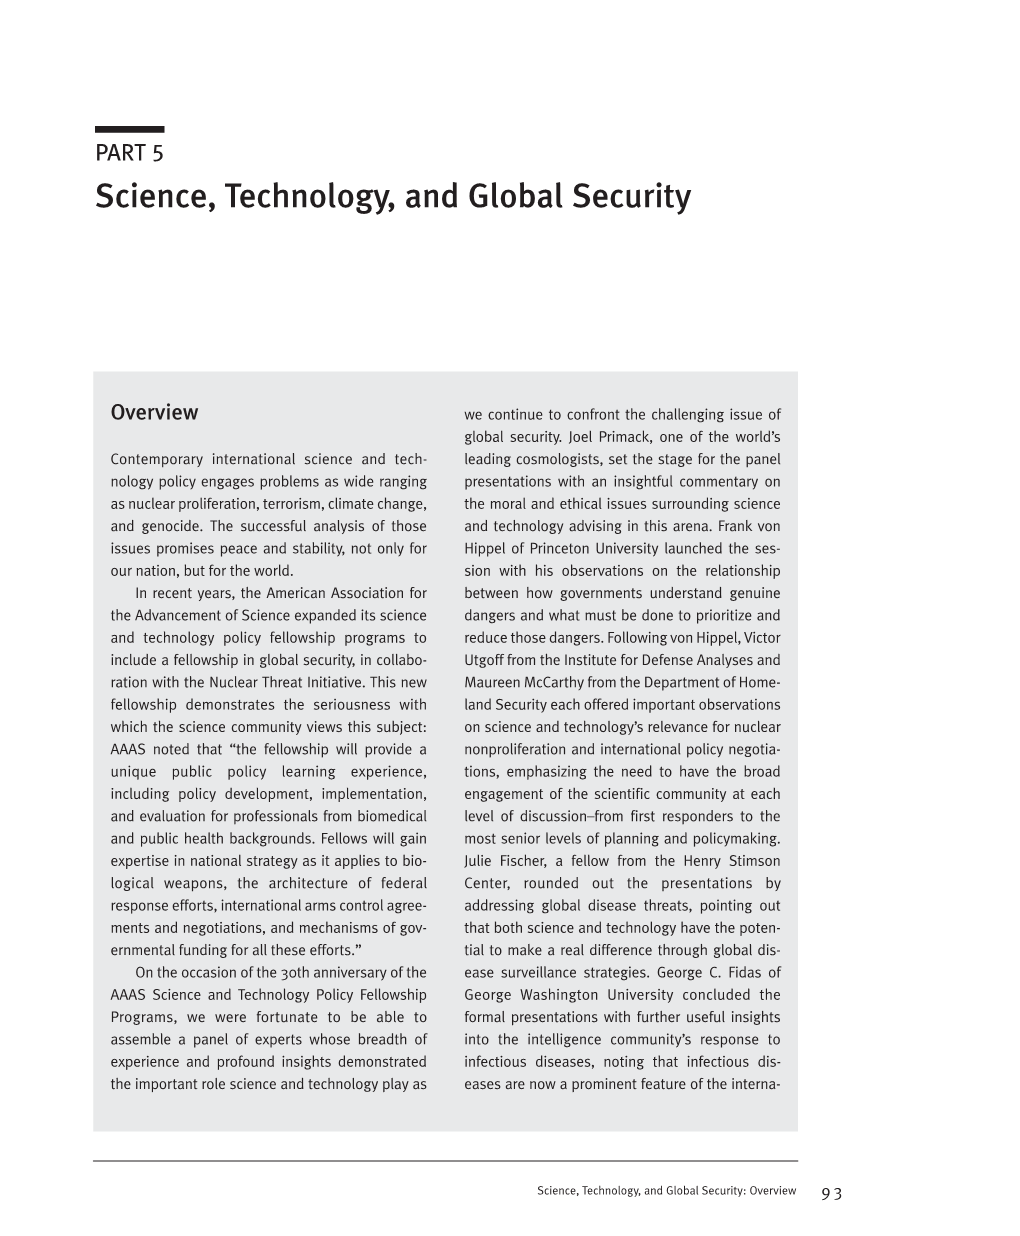 Science, Technology, and Global Security